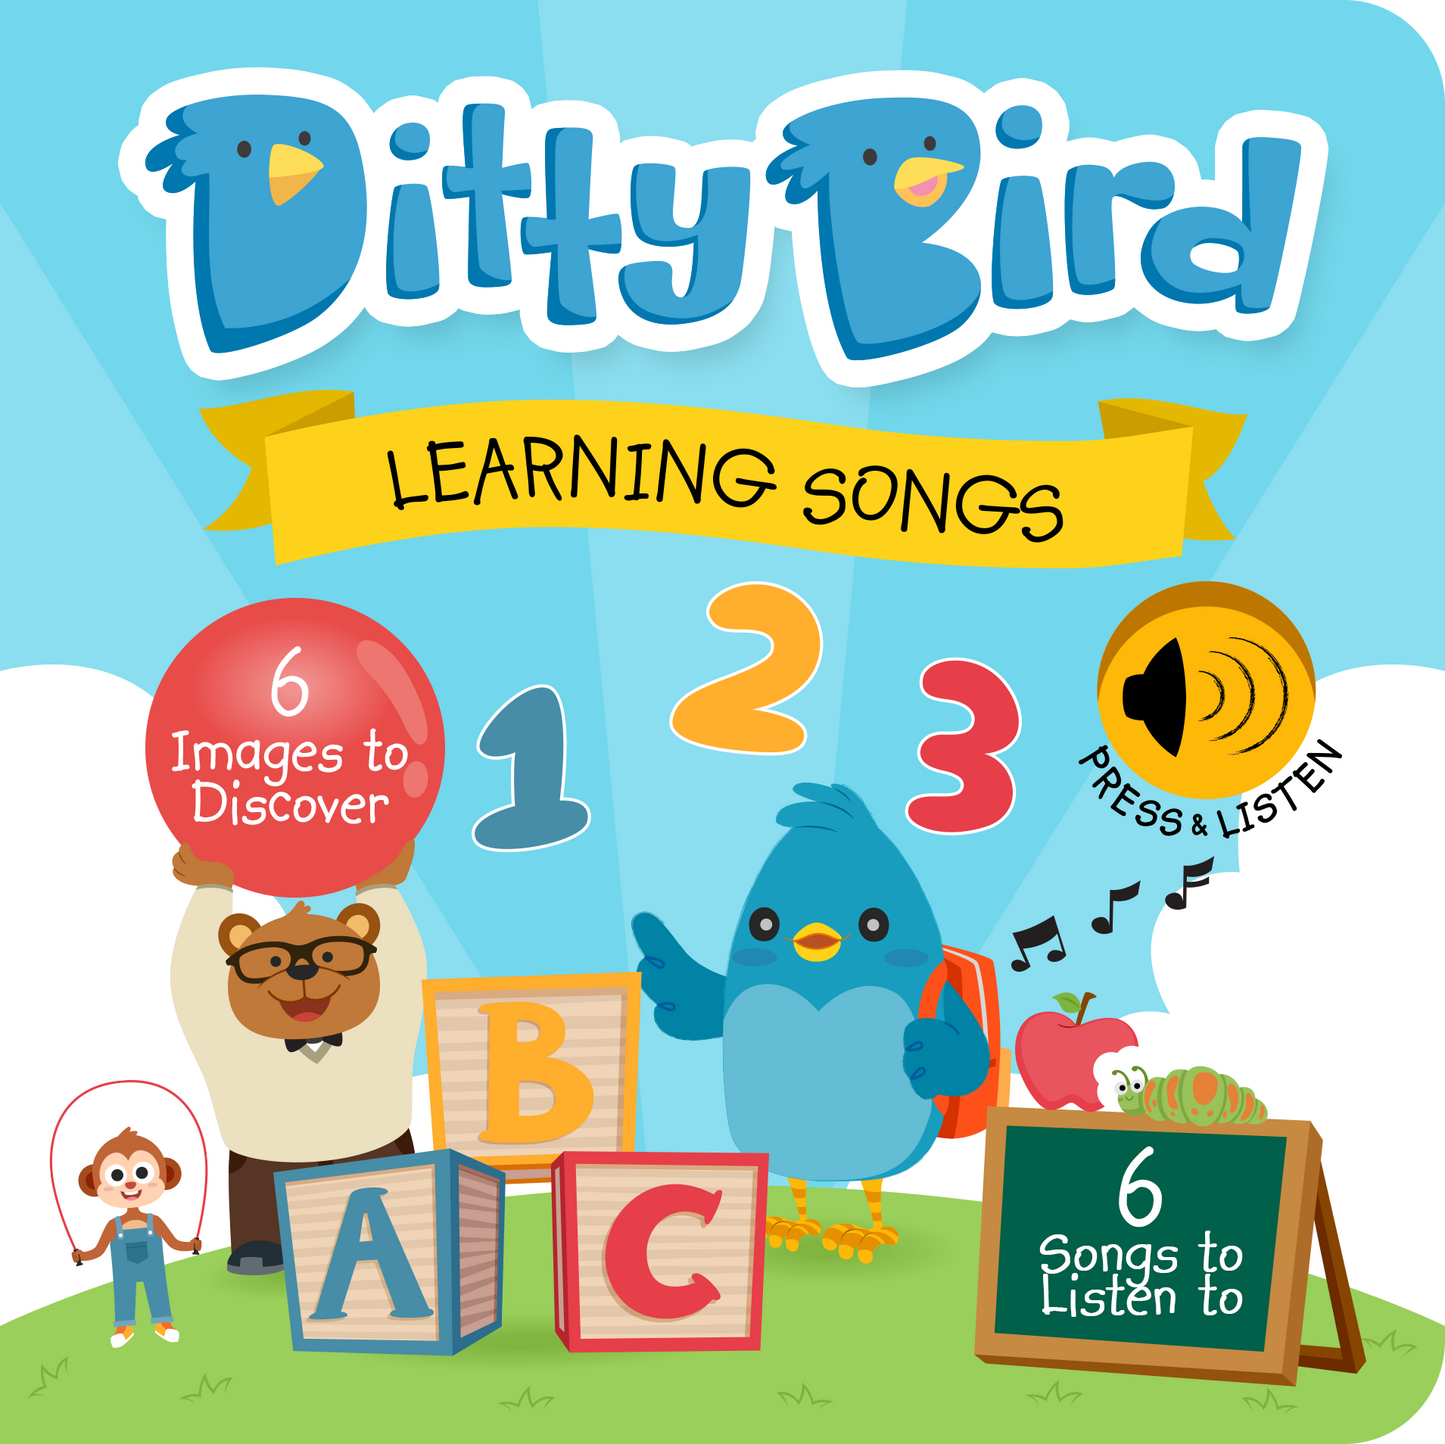 DITTY BIRD Sound Book: Learning Songs